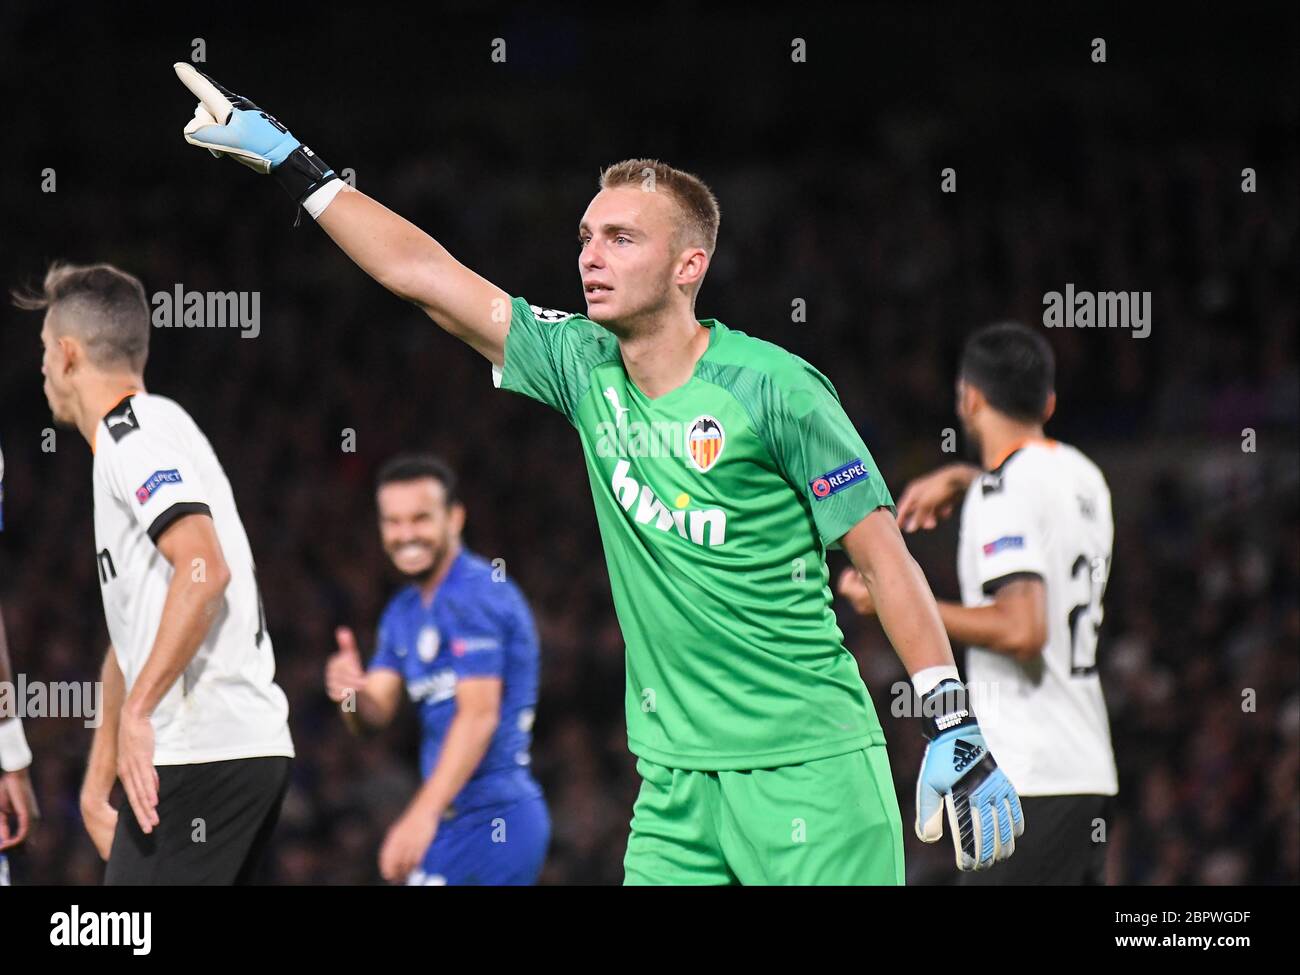 LONDON, ENGLAND - SEPTEMBER 17, 2019: Jasper Cillessen of Valencia pictured during the 2019/20 UEFA Champions League Group H game between Chelsea FC (England) and Valencia CF (Spain) at Stamford Bridge. Stock Photo